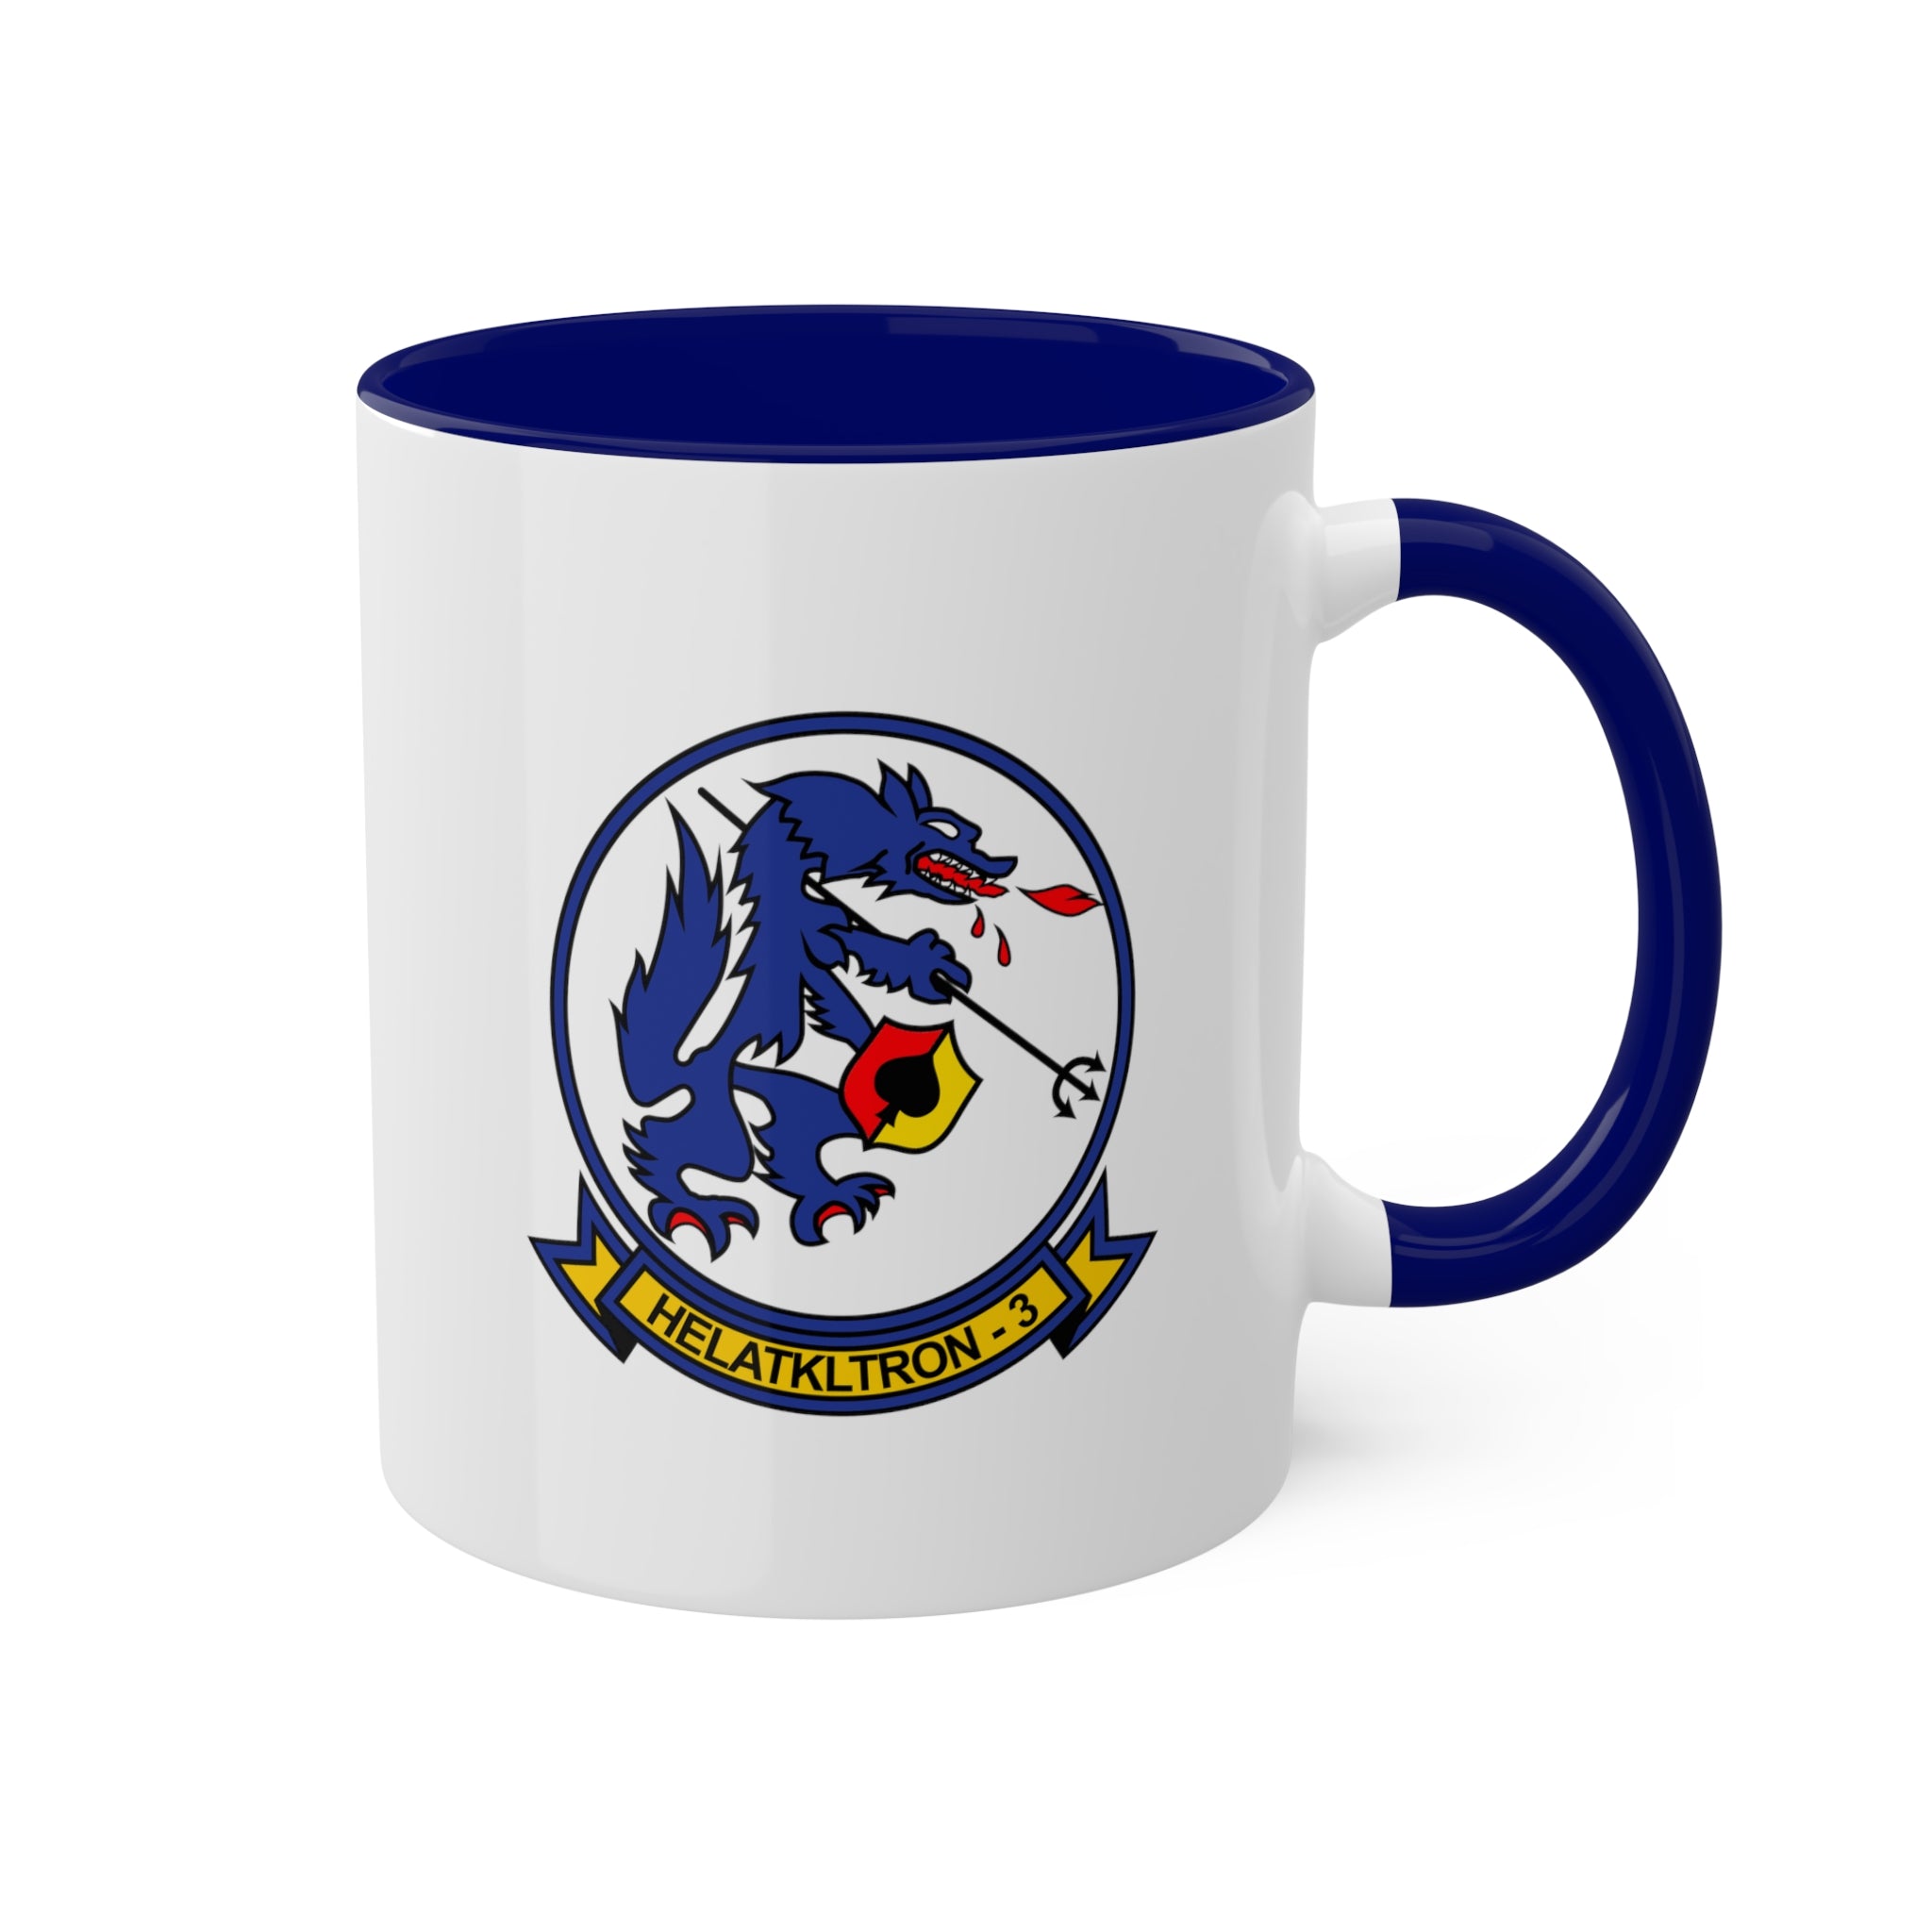 HA(L)-3 "Seawolves" Naval Aviator 10oz. Mug, Navy Helicopter Attack Squadron flying the H-1 - Shop at Hippy's Goodness